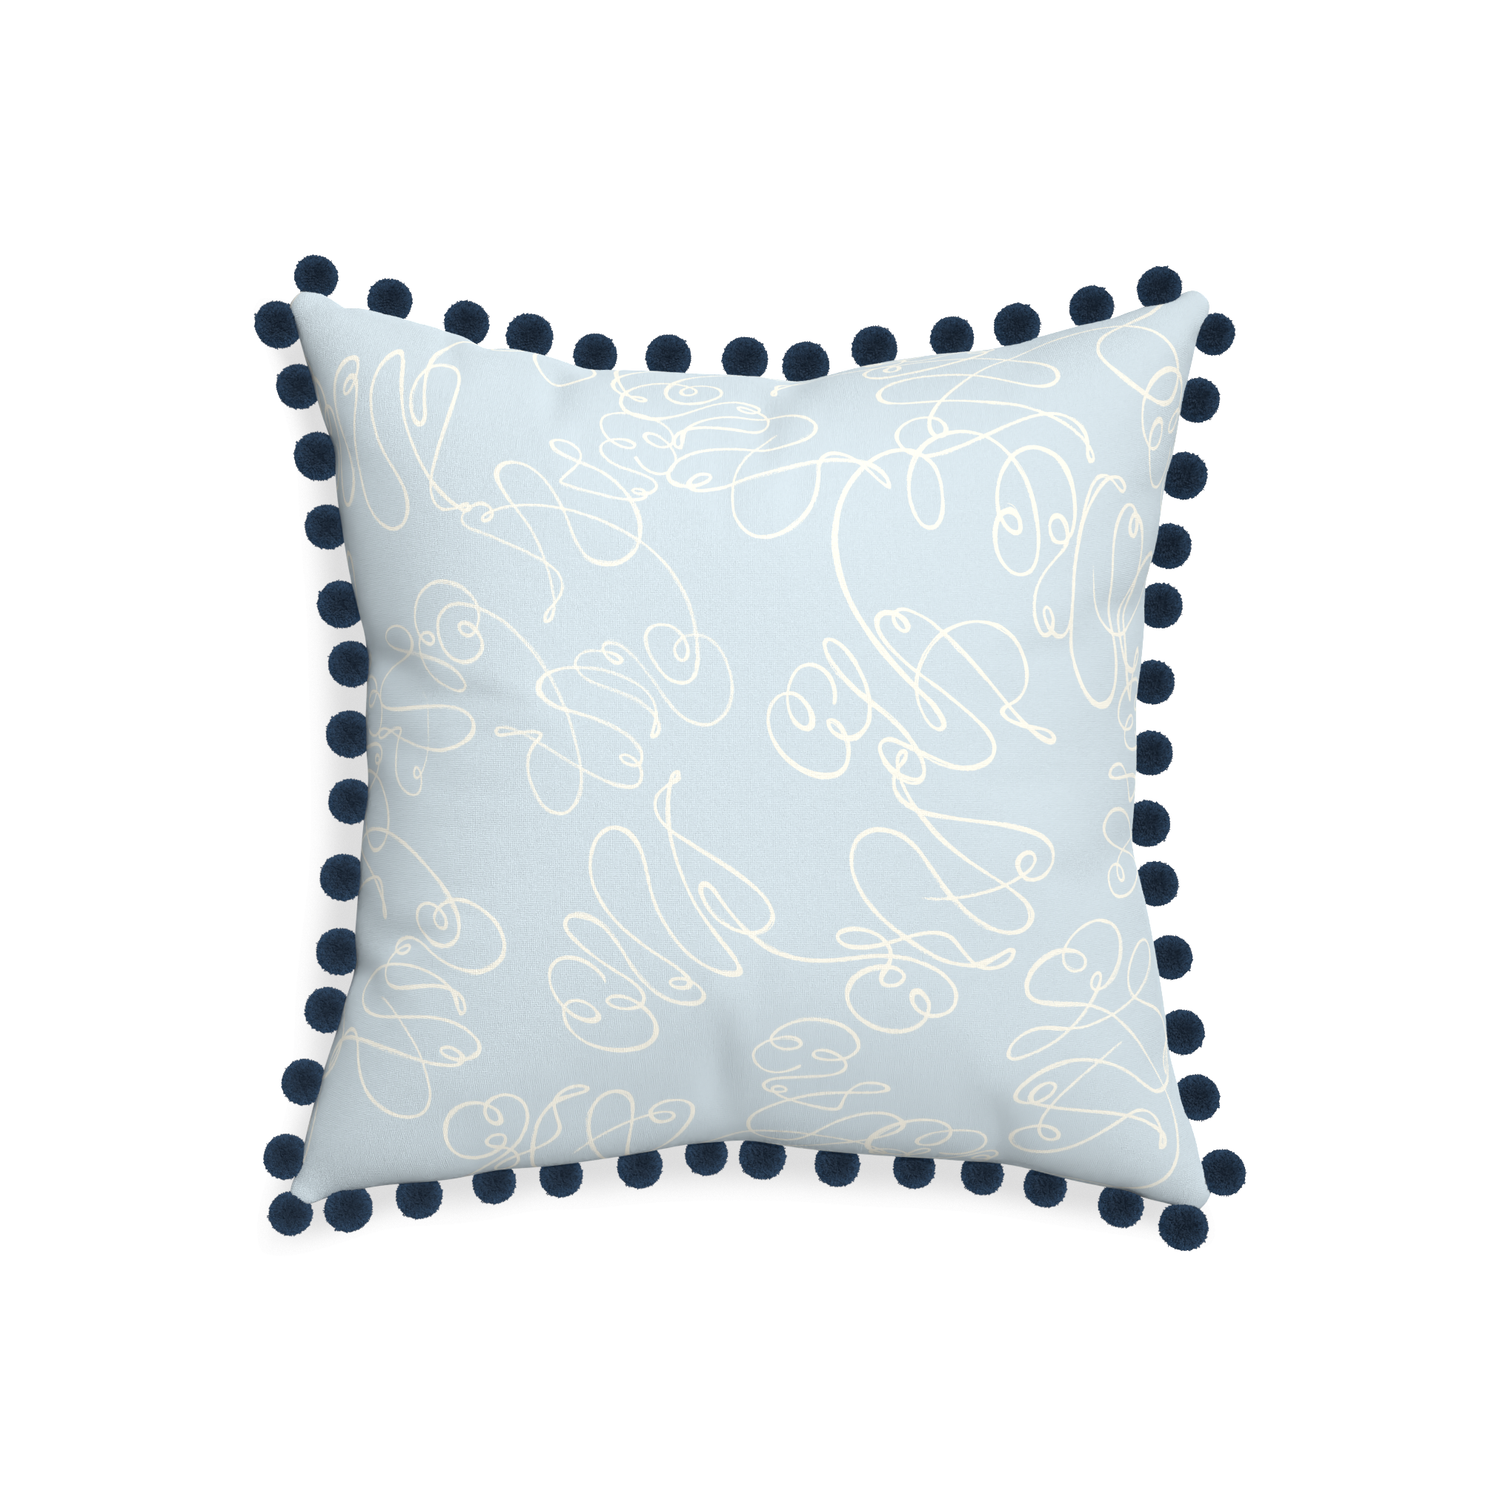 20-square mirabella custom powder blue abstractpillow with c on white background